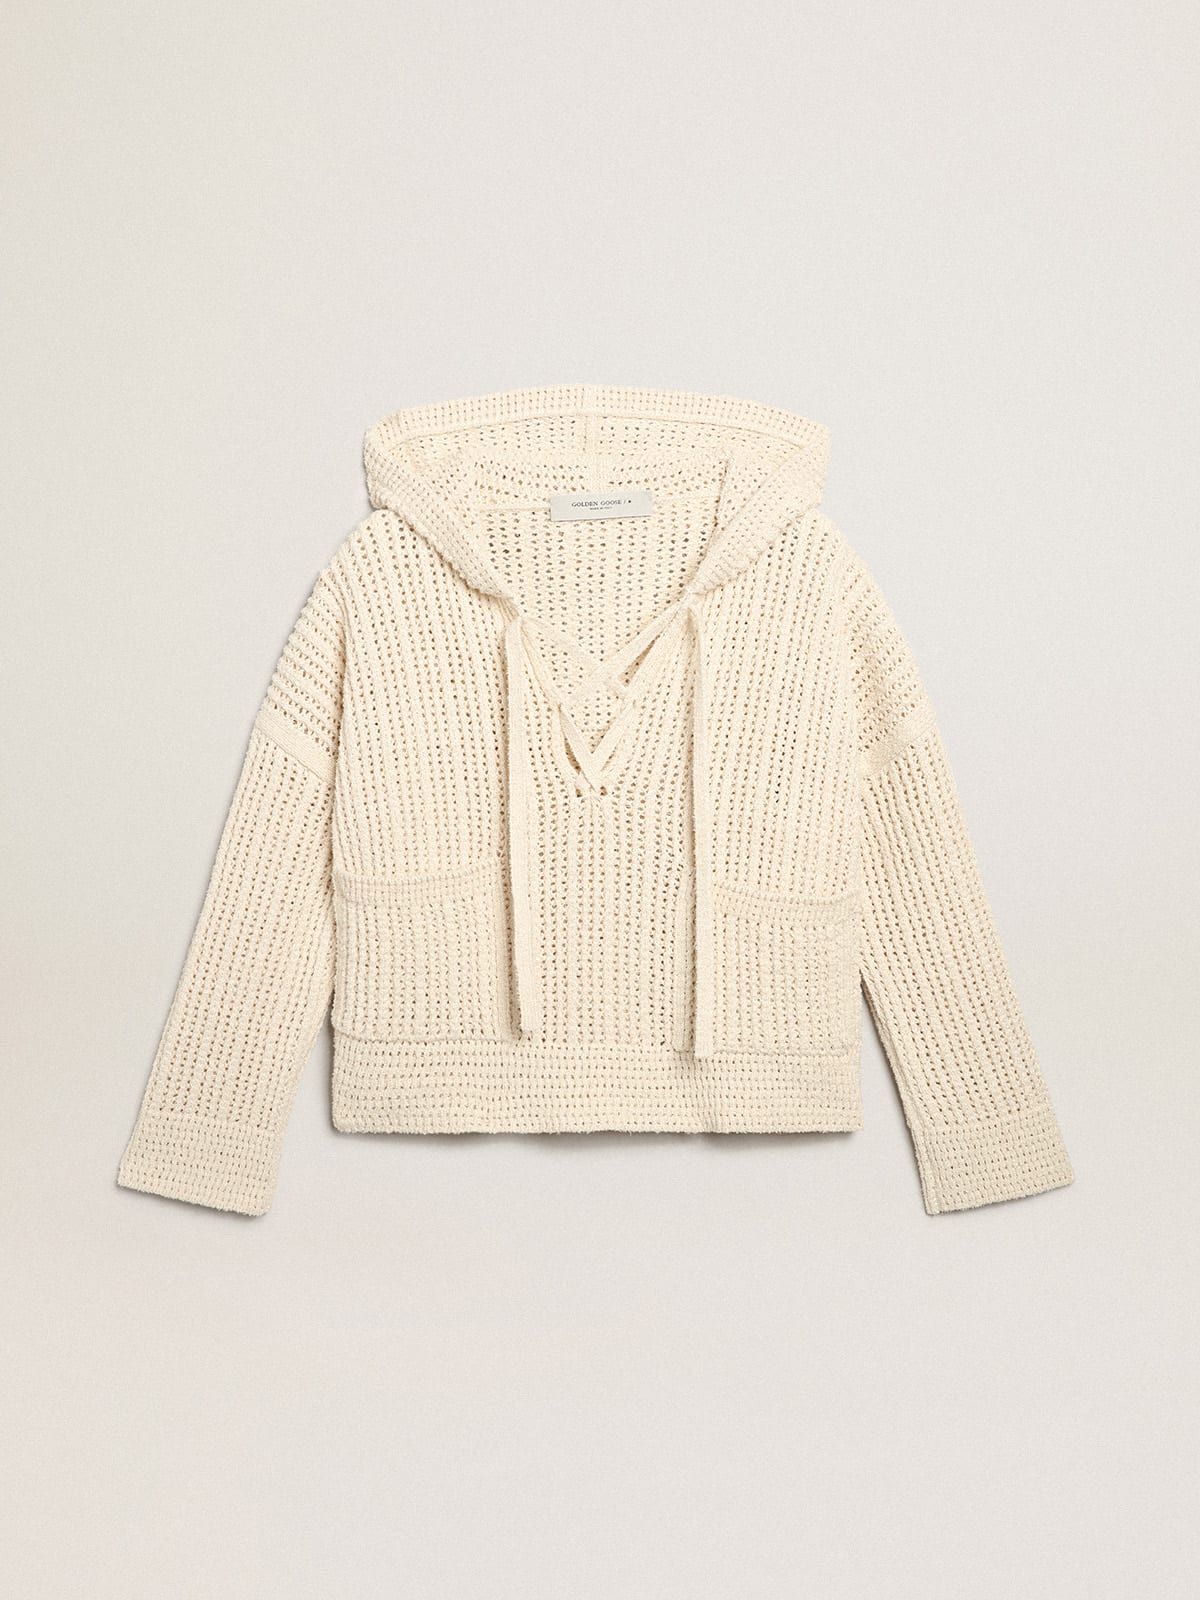 Golden Goose - Hooded top in papyrus-colored cotton in 